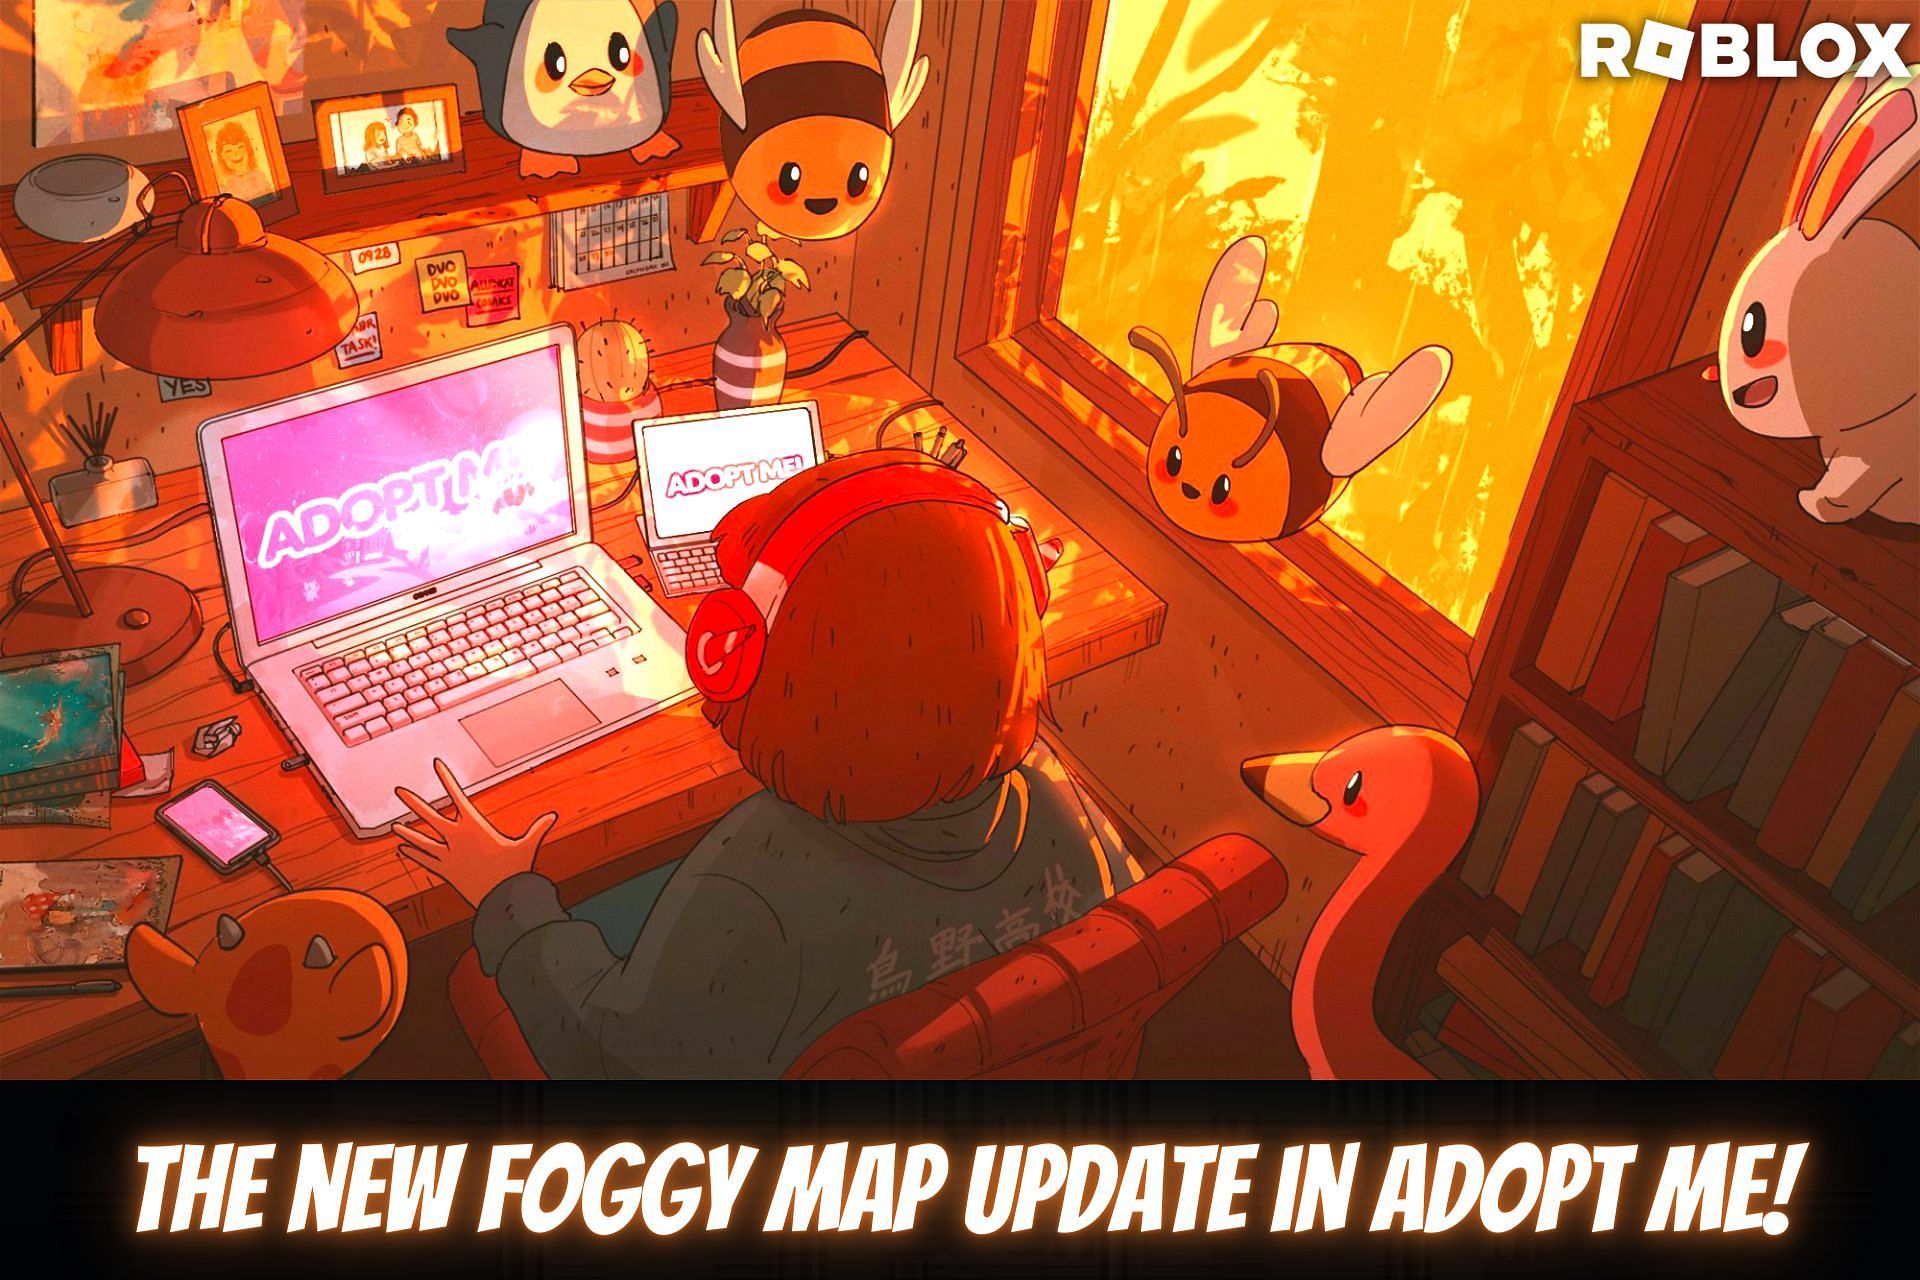 The new Foggy Map update in Adopt Me!